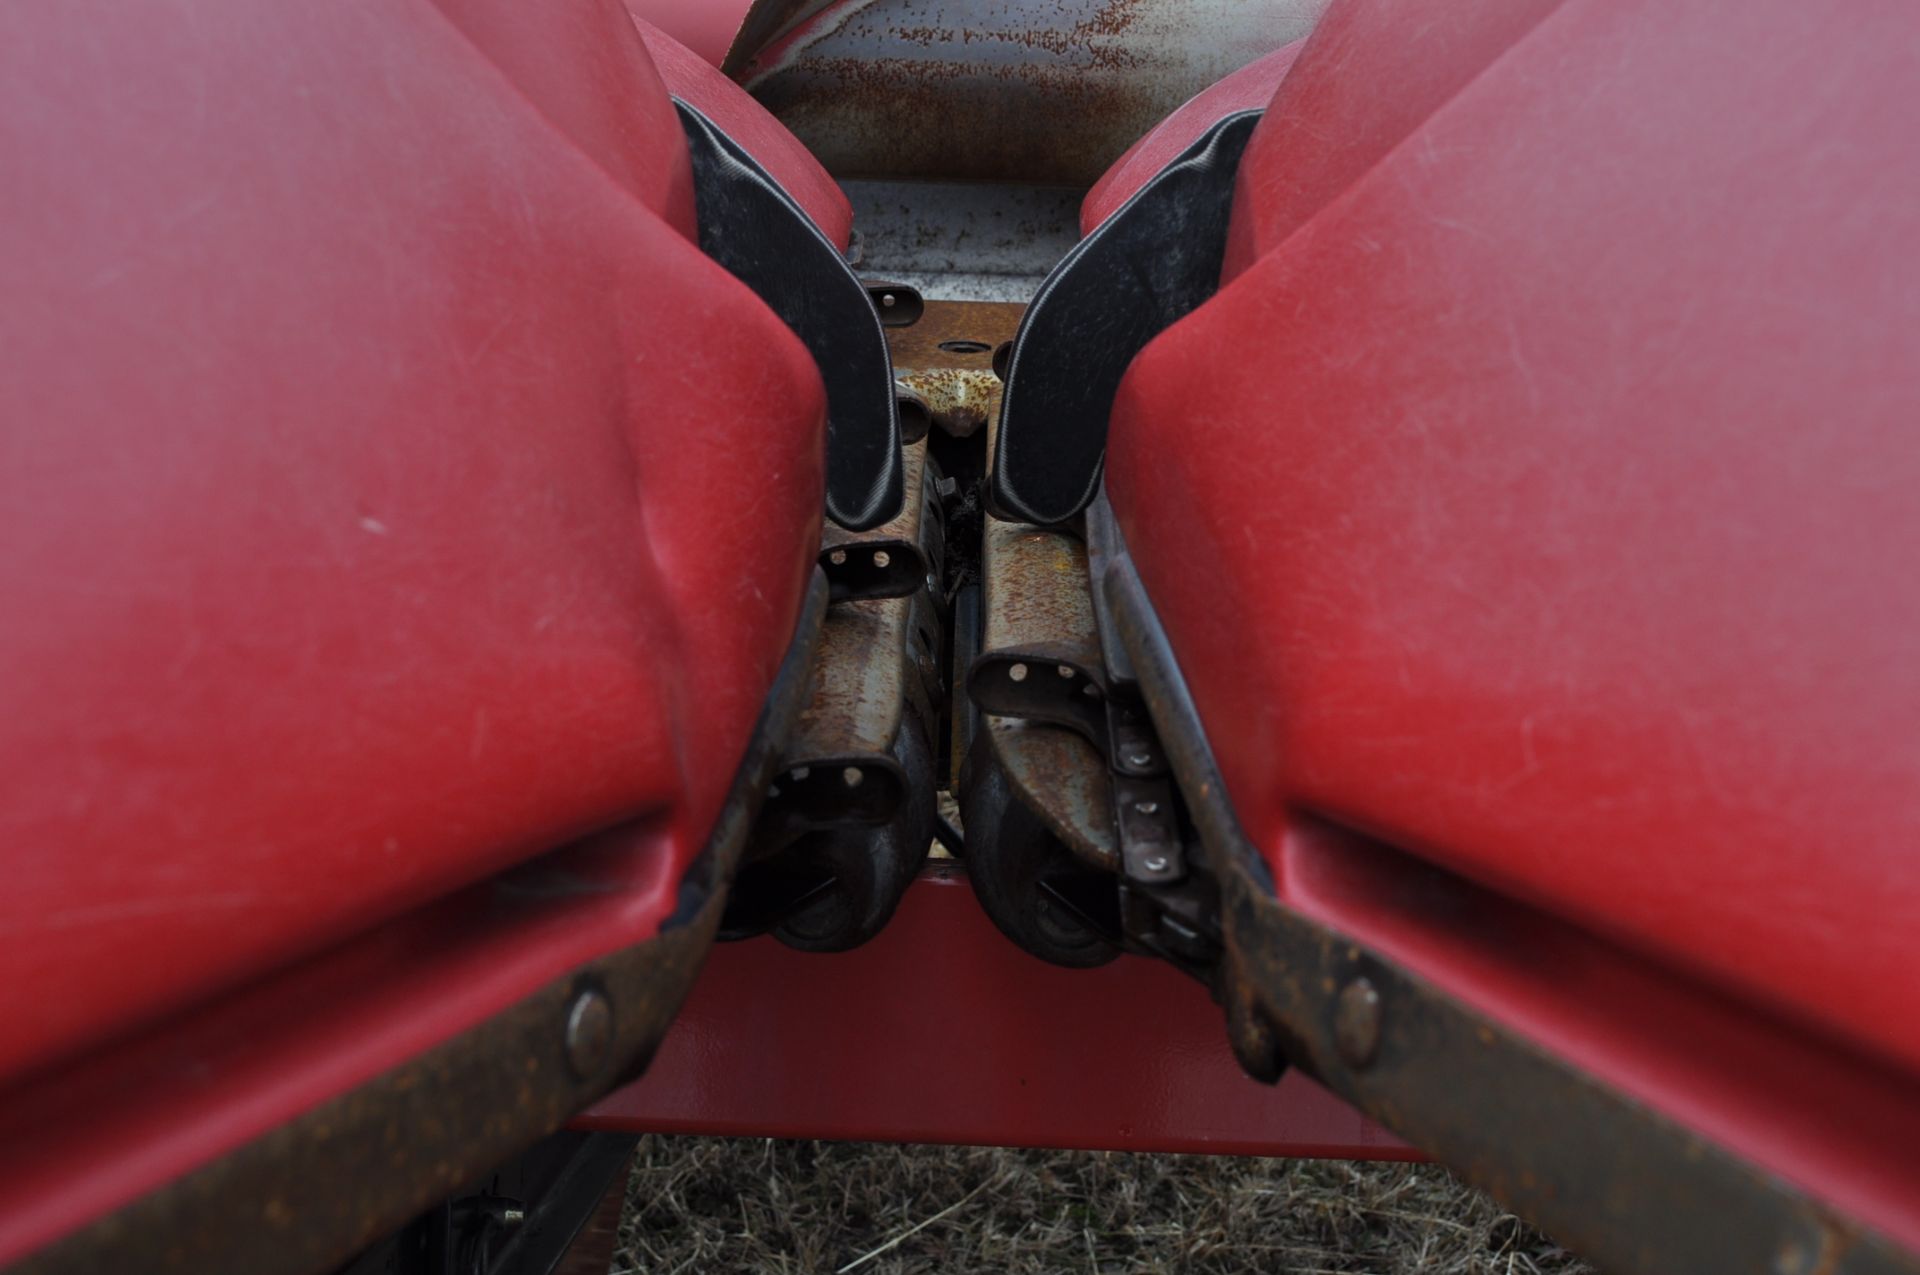 CASE IH 2208 Poly Corn Head, 8 rows x 30”, hyd deck plates, knife rolls, poly, 3 header height - Image 15 of 16